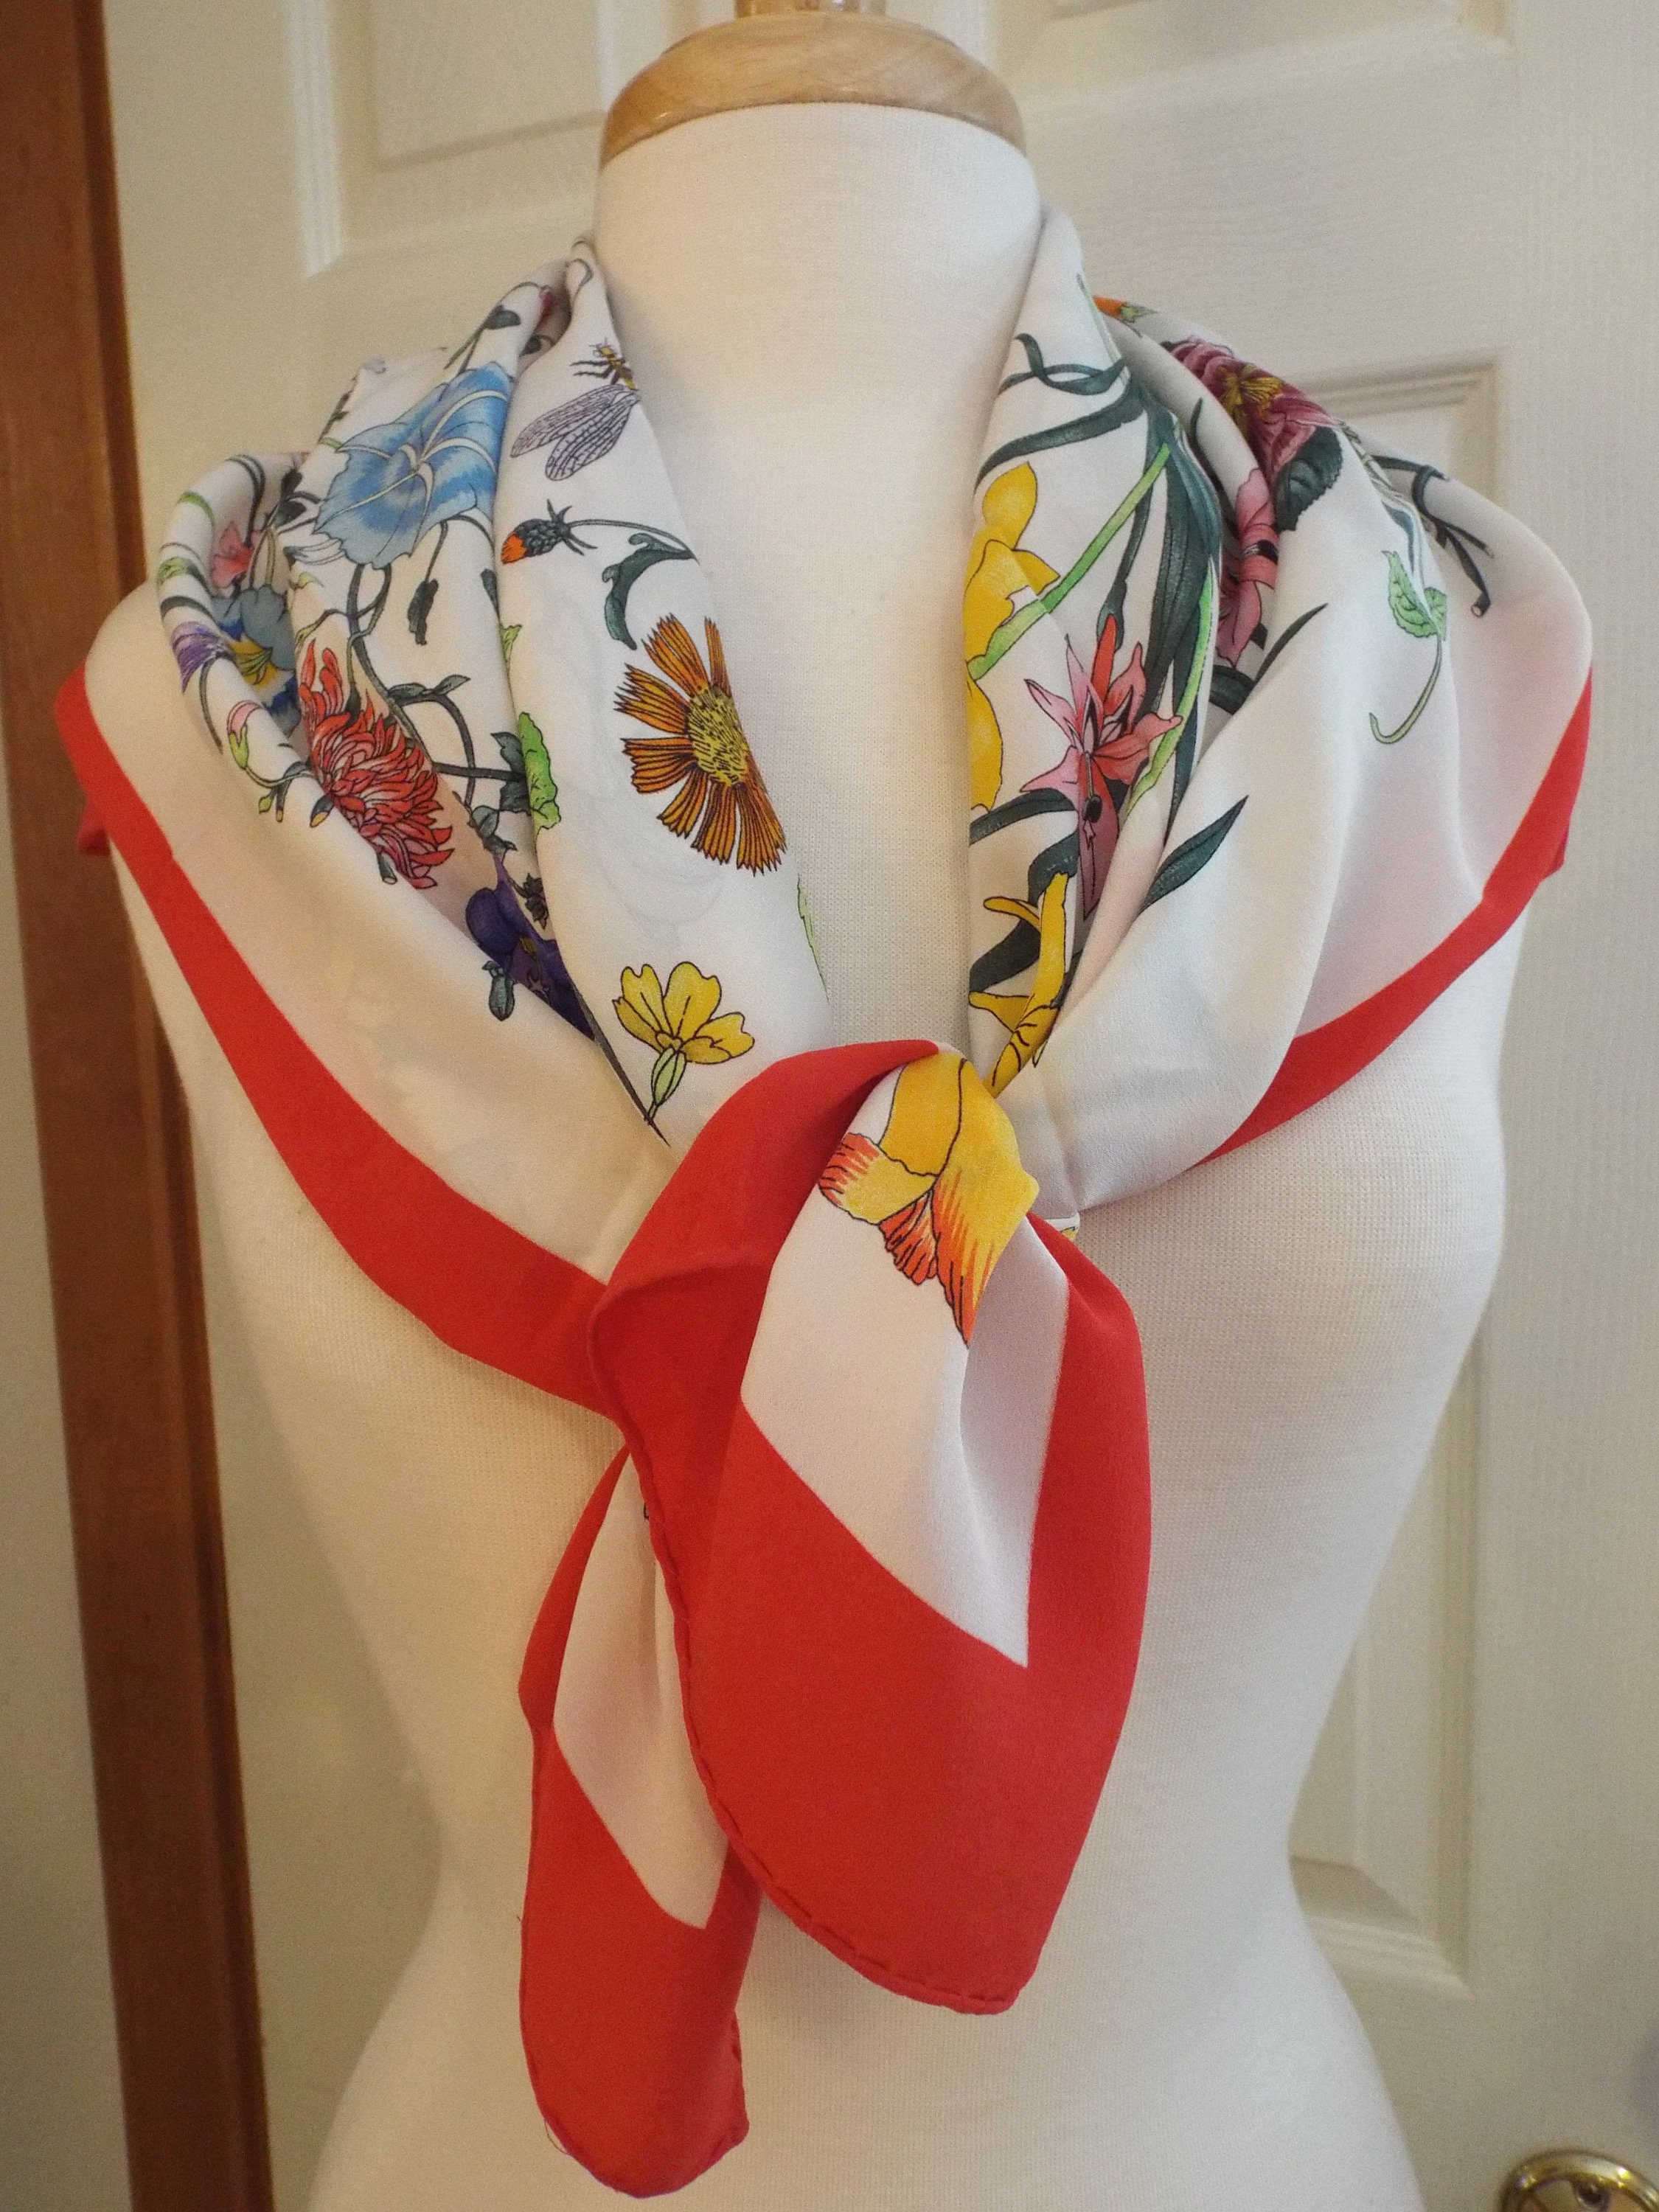 Authentic GUCCI ACCORNERO Floral Scarf Gucci Made in Italy | Etsy